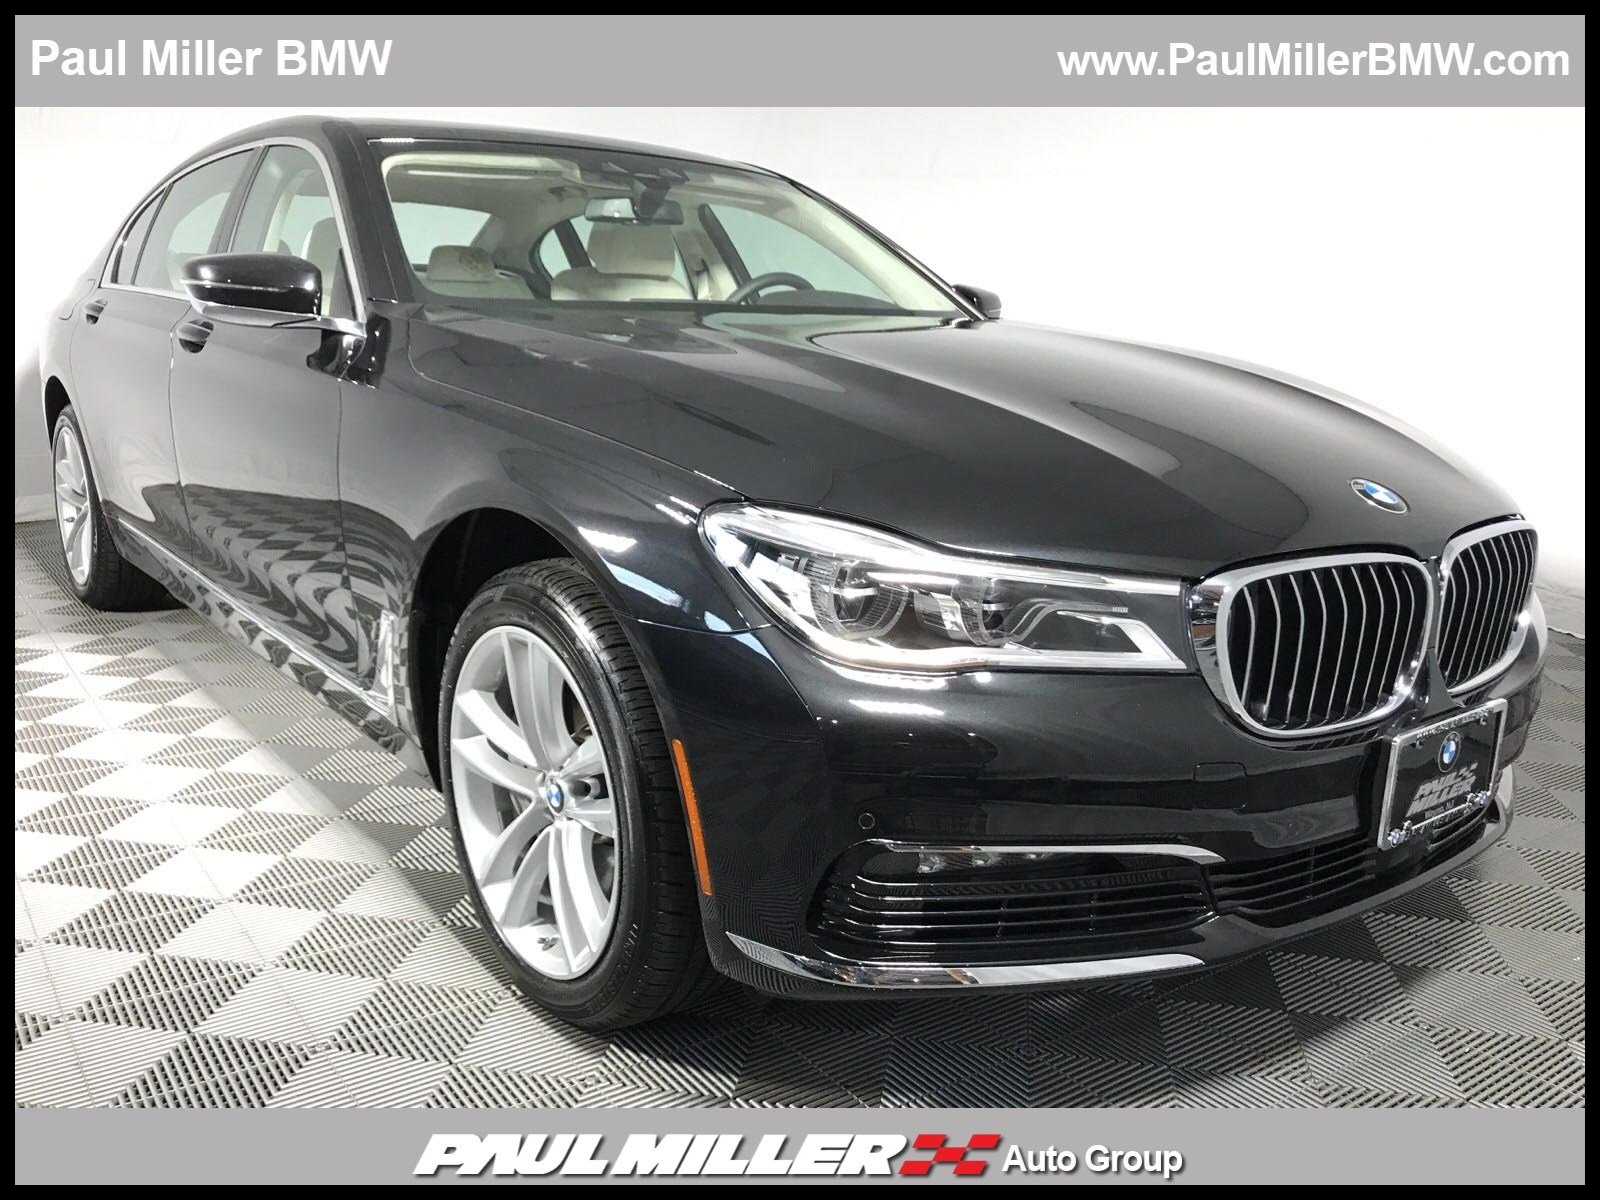 Bmw Pre Owned Lease Certified Pre Owned 2018 Bmw 7 Series 4dr Car In Wayne L